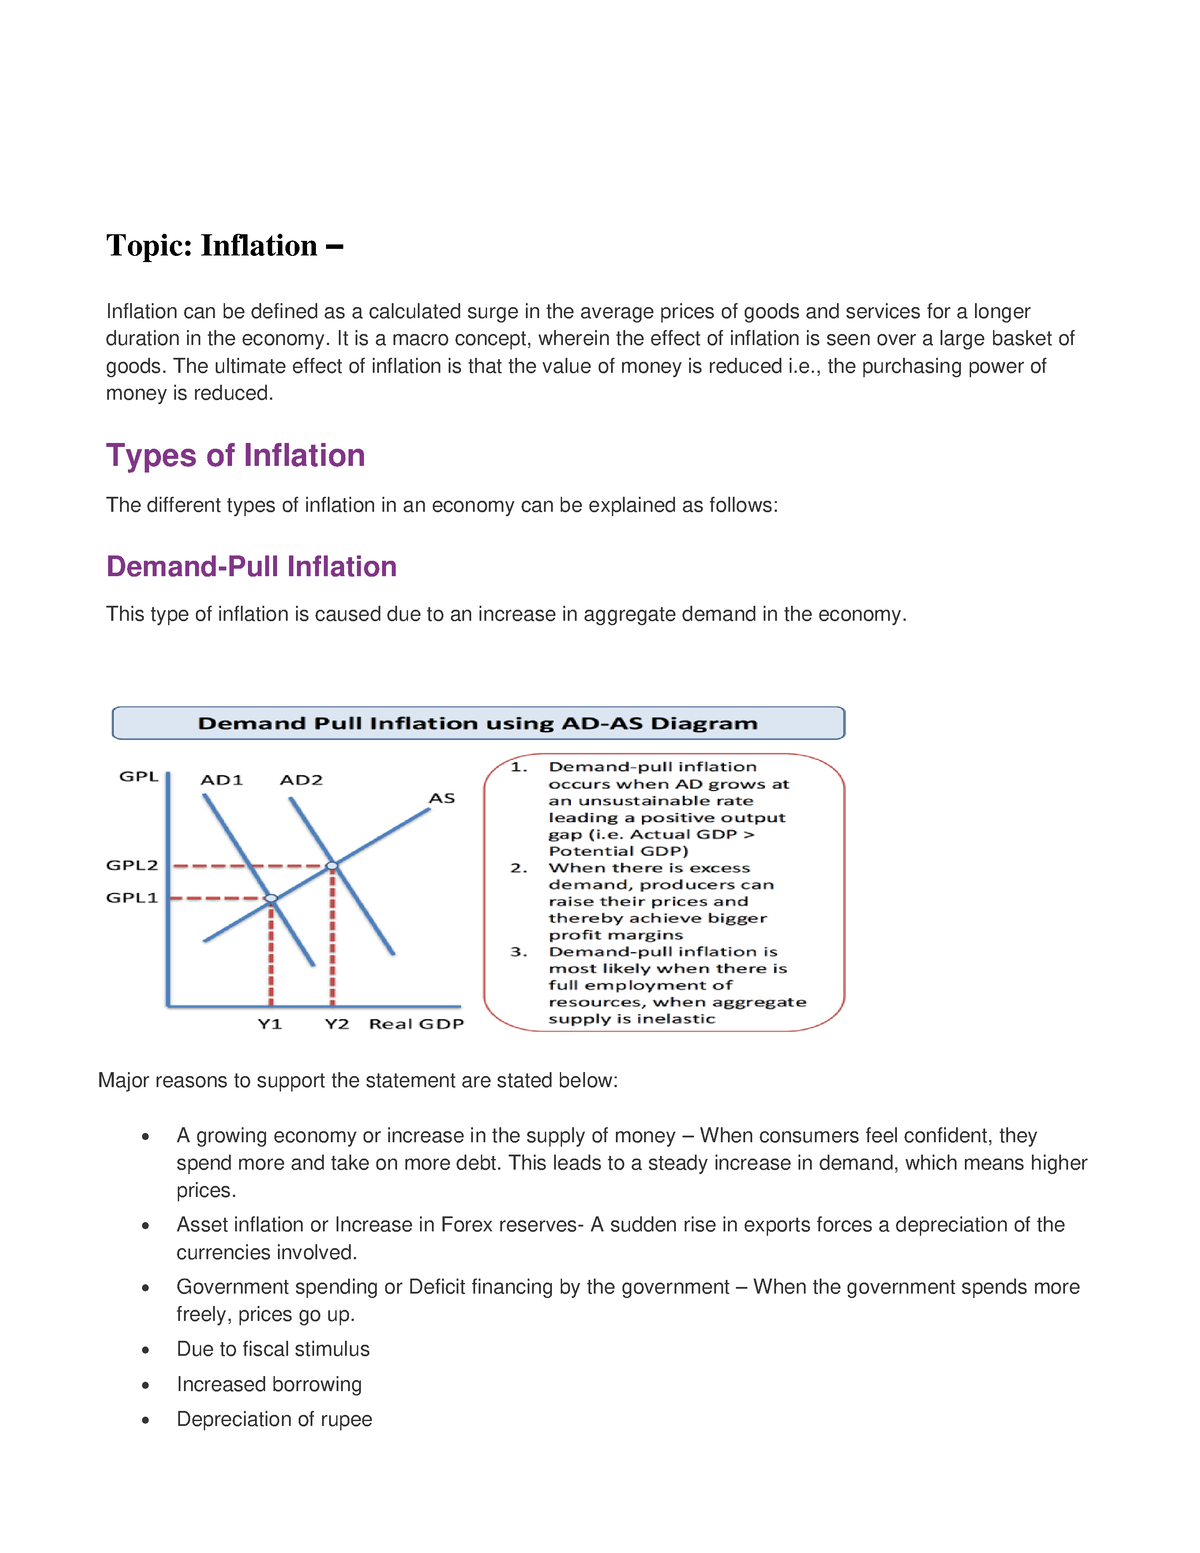 inflation in the indian economy essay